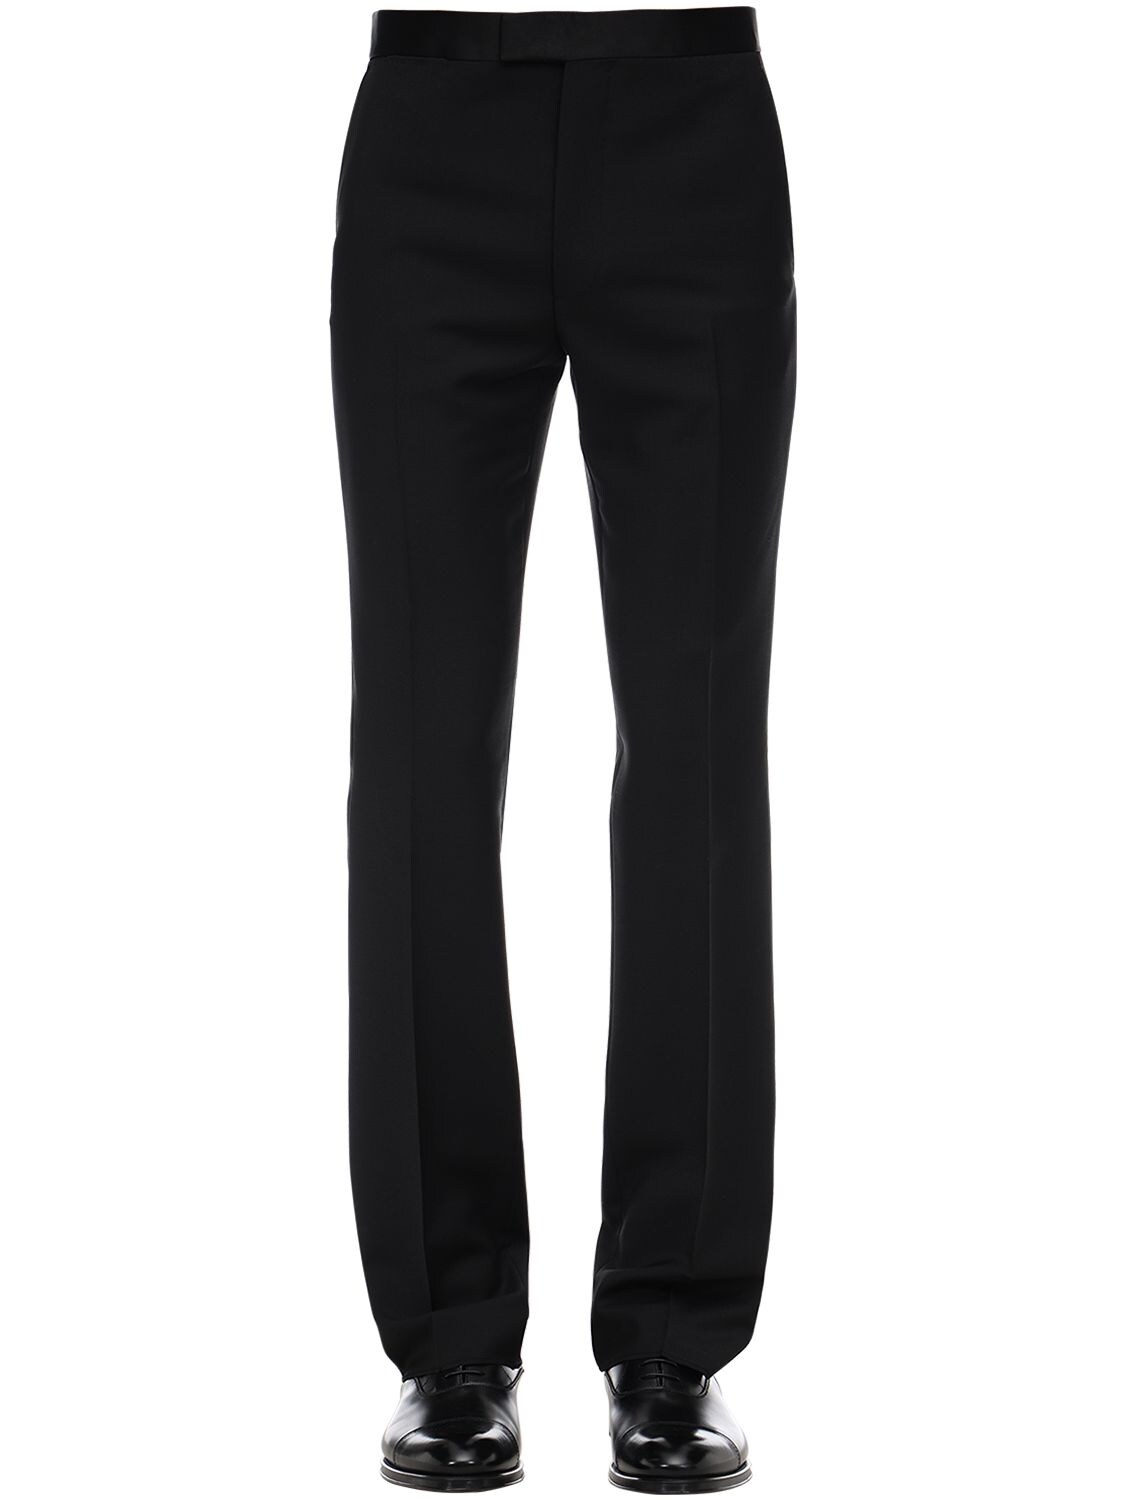 Shop Gucci Mohair & Wool Heritage Tuxedo In Black